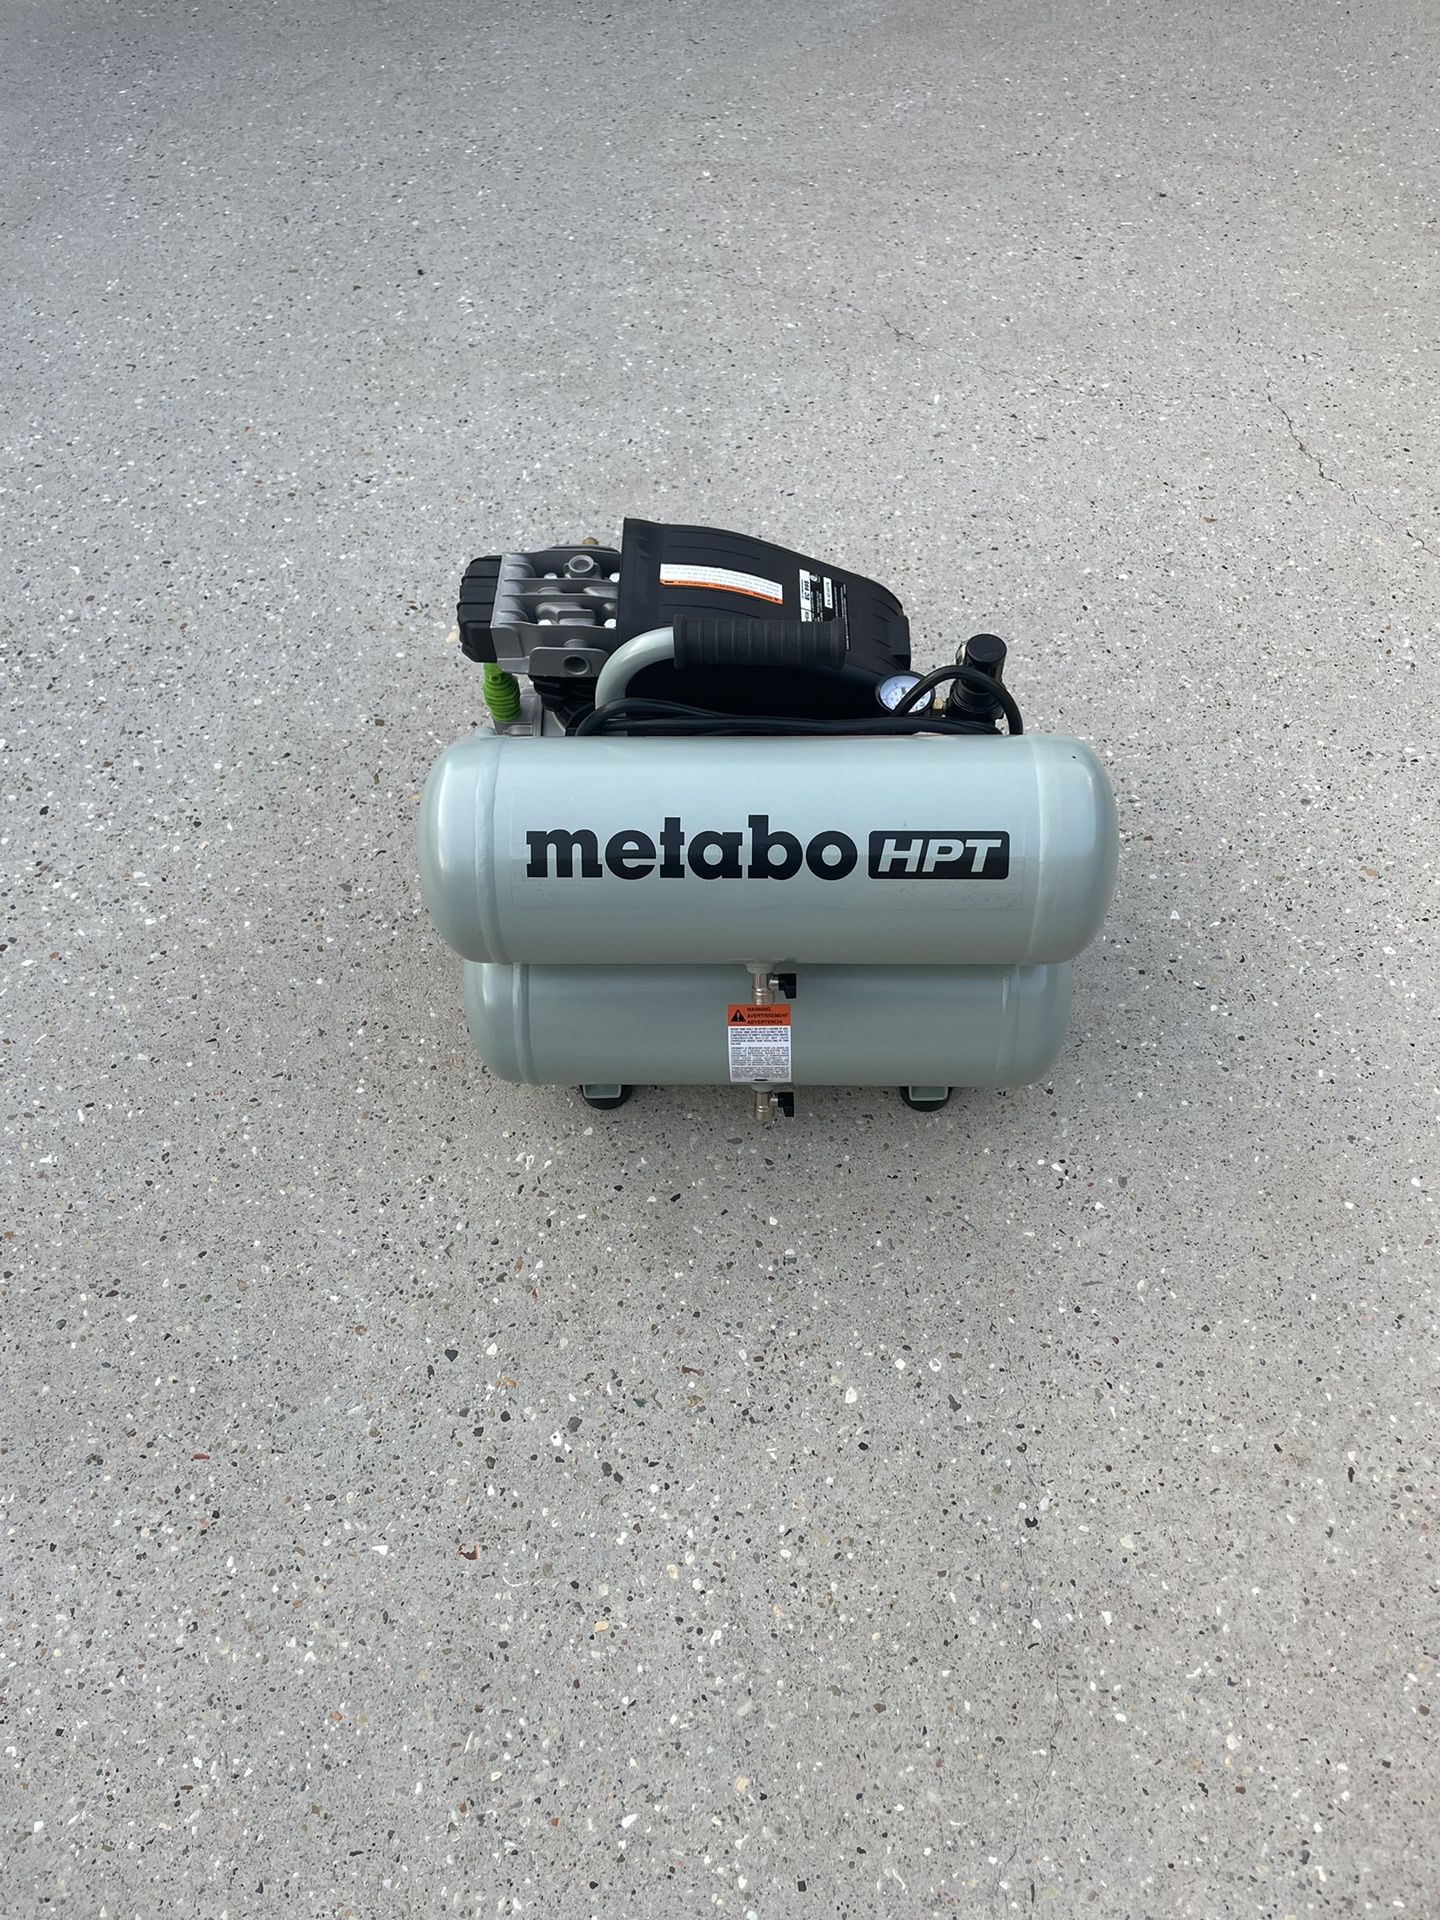 Metabo Hpt Air Compressor New